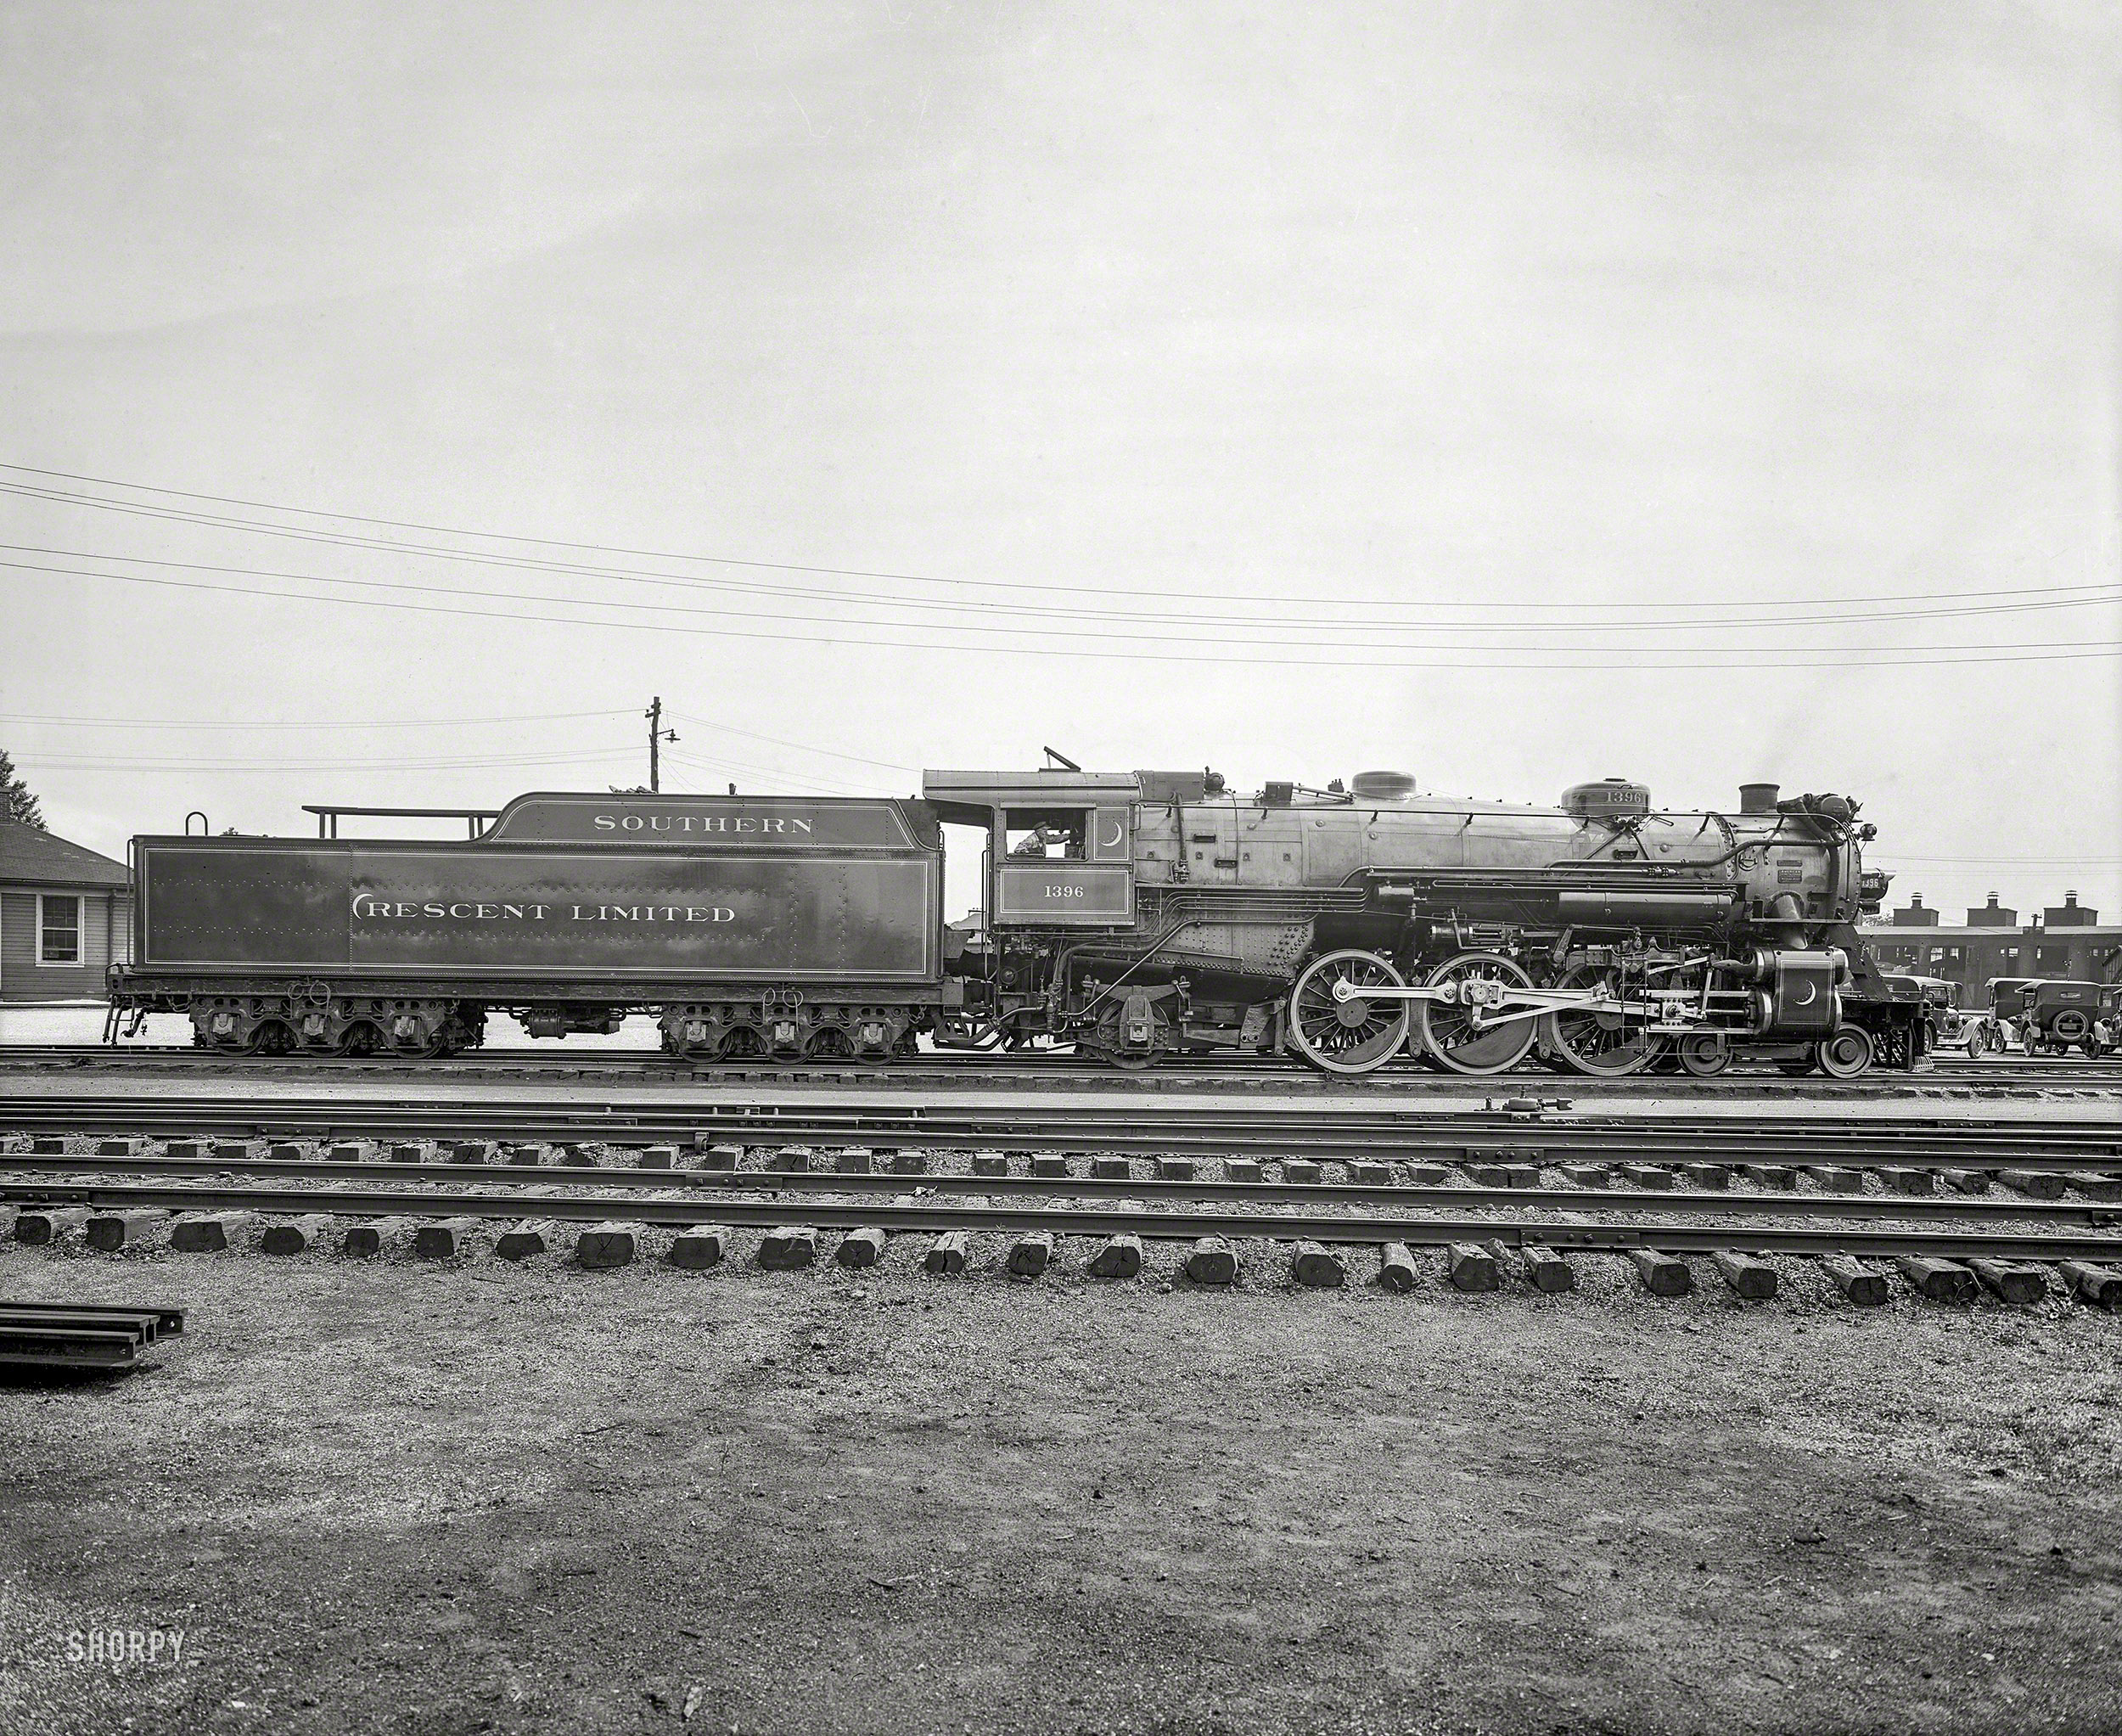 &nbsp; &nbsp; &nbsp; &nbsp; "The Crescent Limited, ace of the Southern Railway System's passenger train service between New York, Washington, Atlanta and New Orleans."
Alexandria, Virginia, circa 1926. "Southern R.R. Co. Crescent Limited locomotive." Previously seen here and here. National Photo glass negative. View full size.